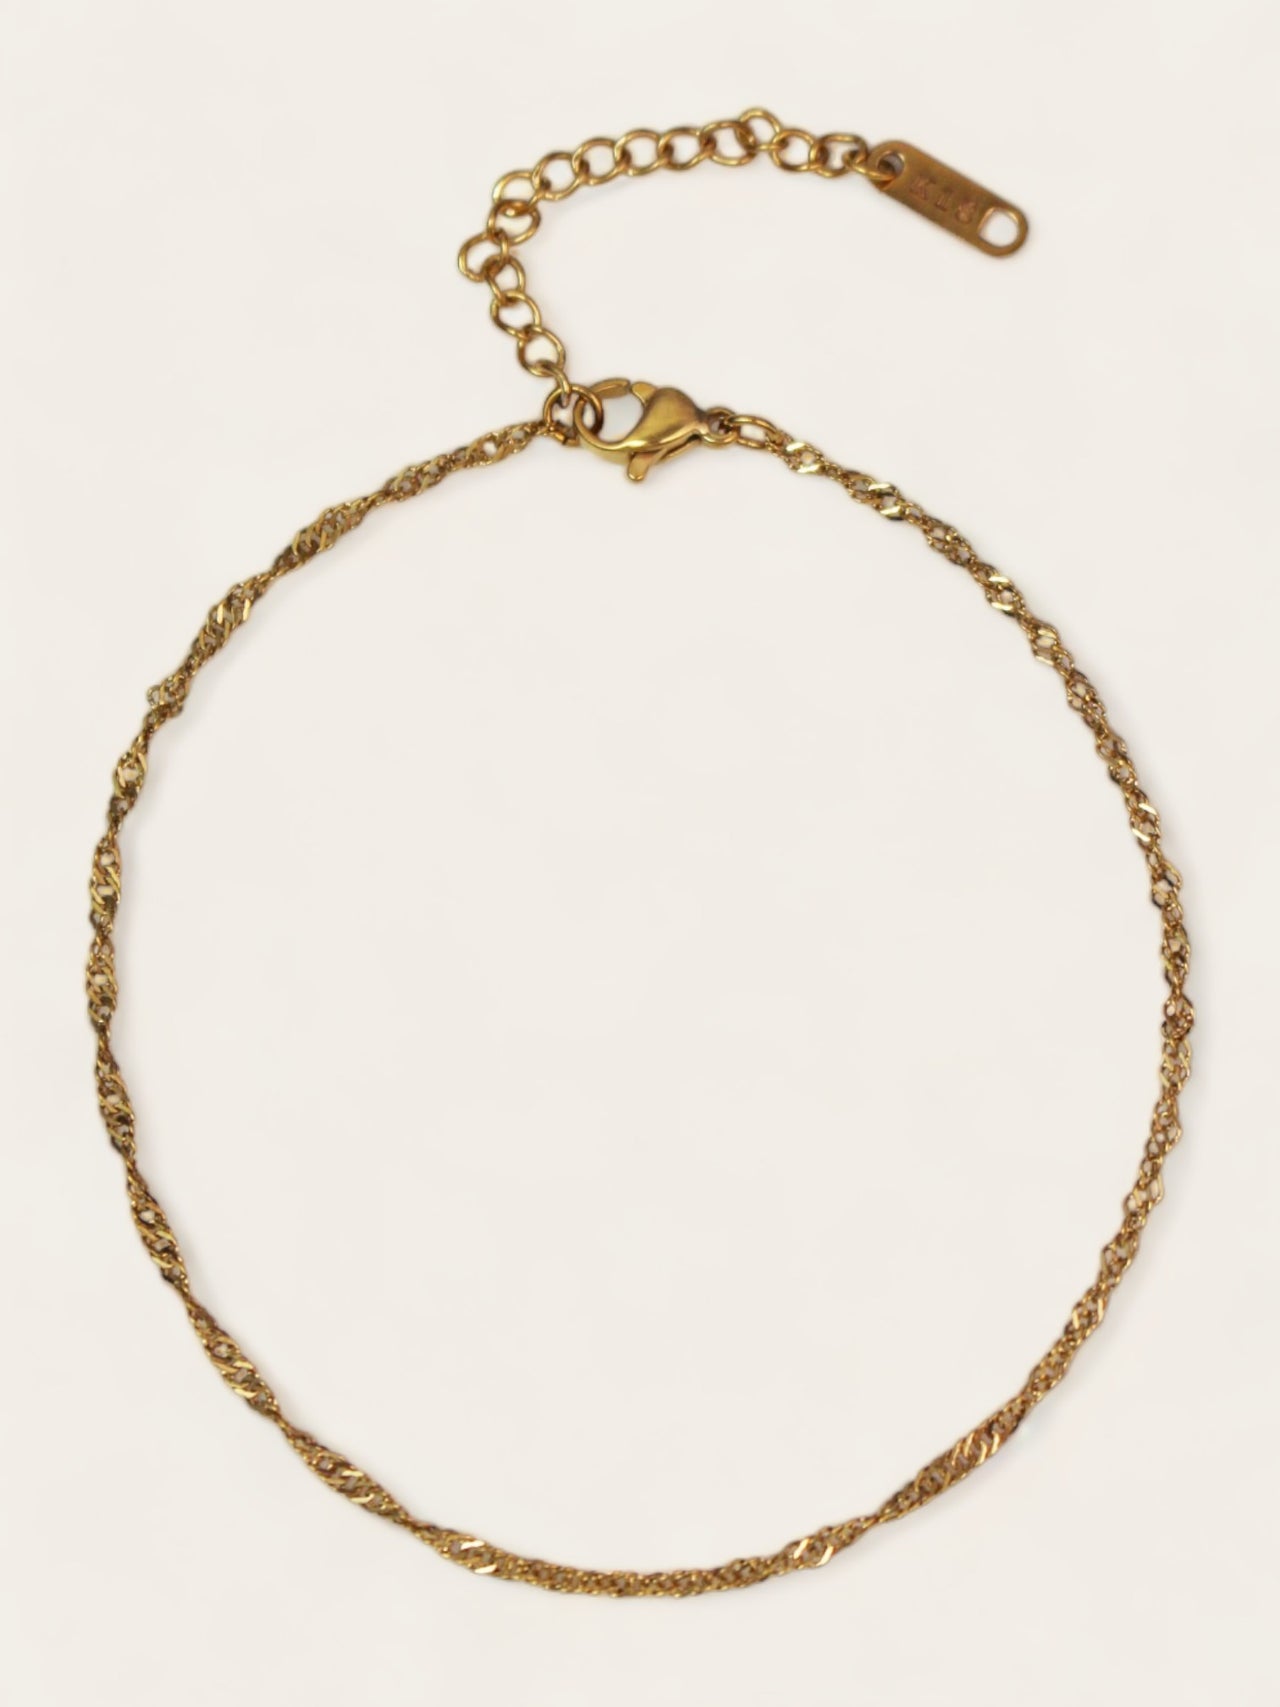 Twisted Chain Anklet